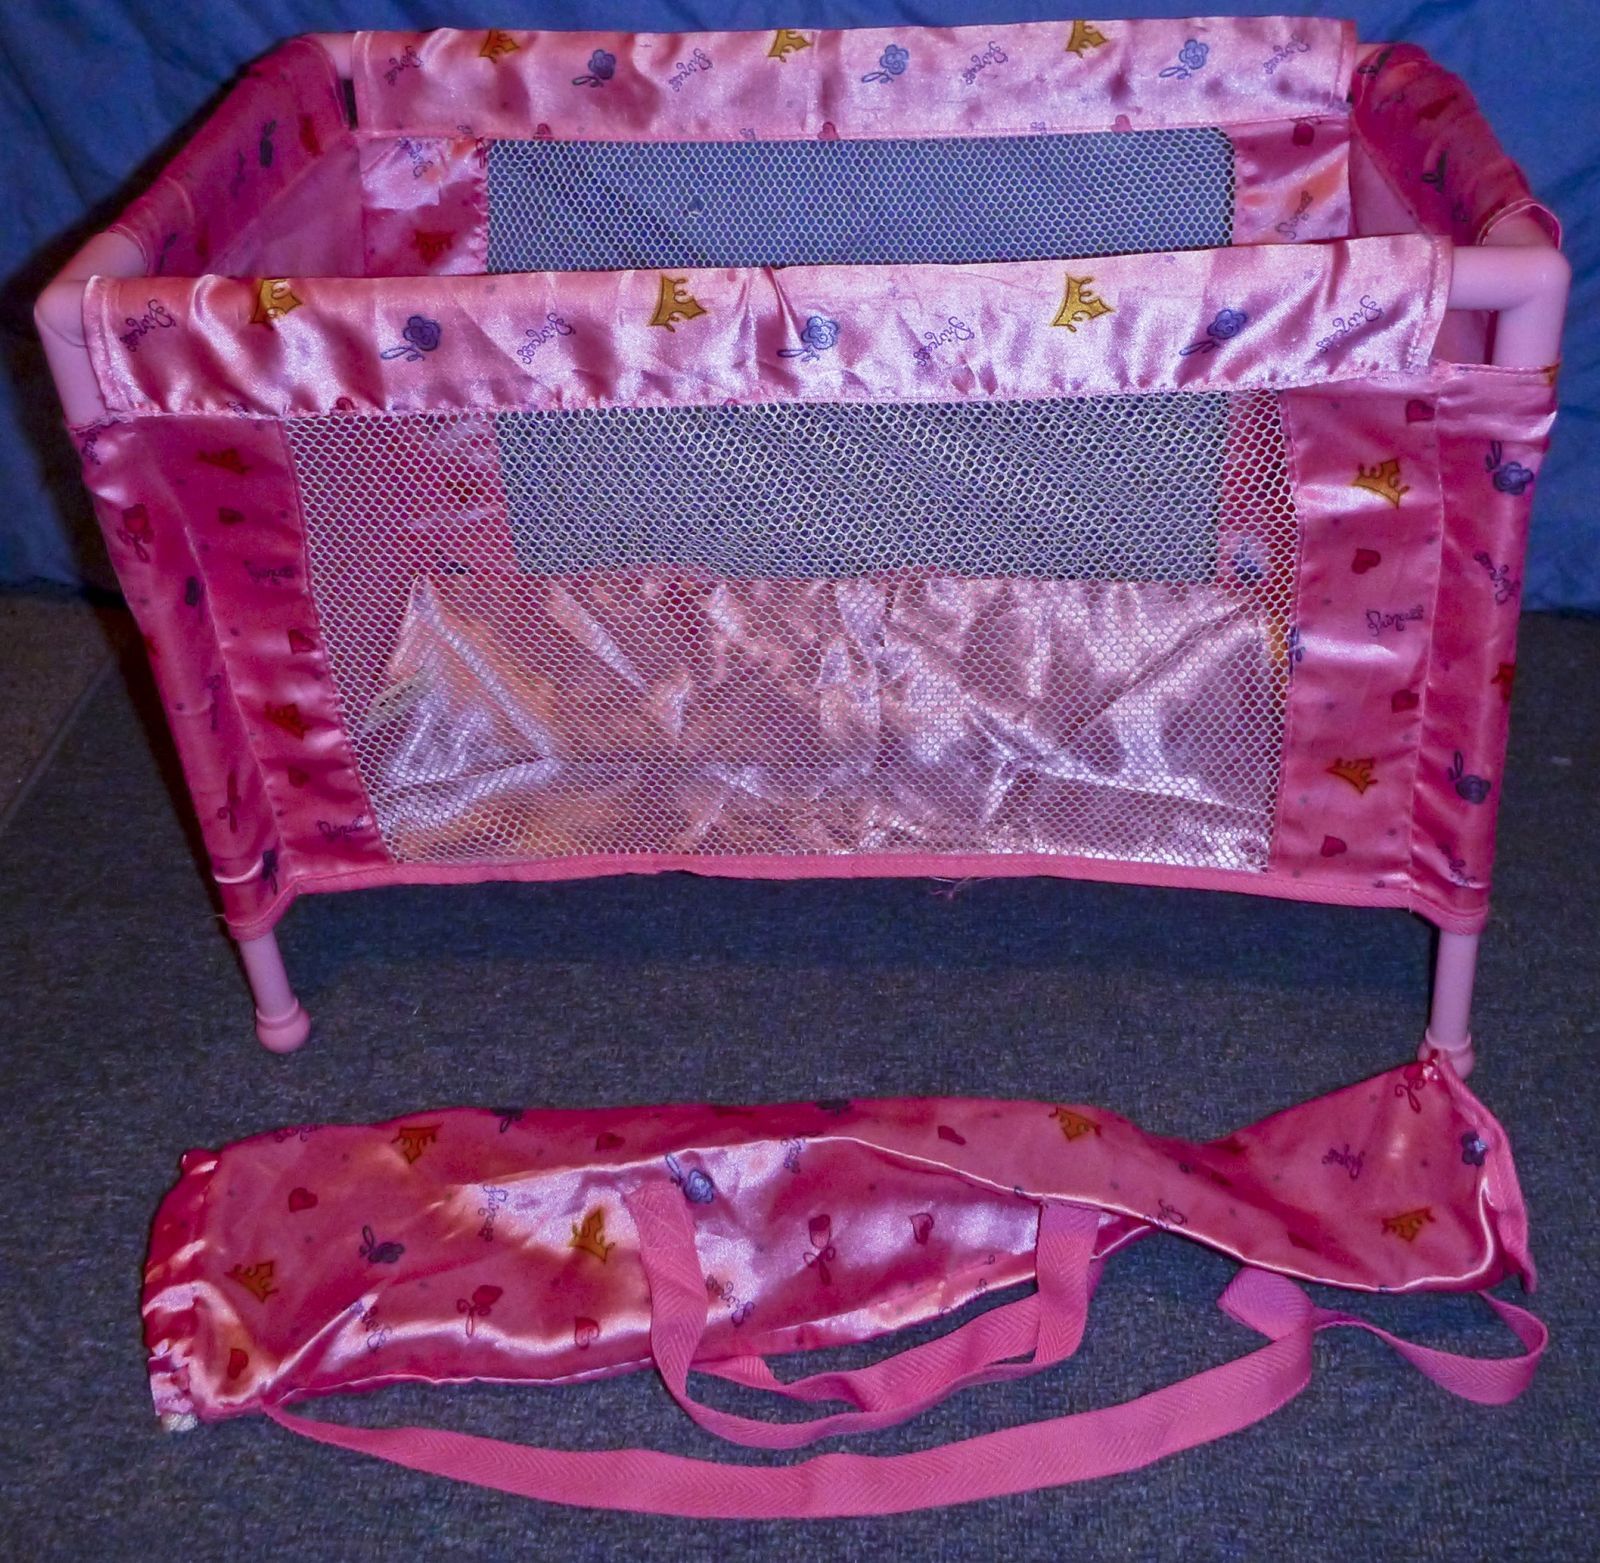  Princess Baby Doll Furniture Lot Swing Highchair Playpen Carrier 